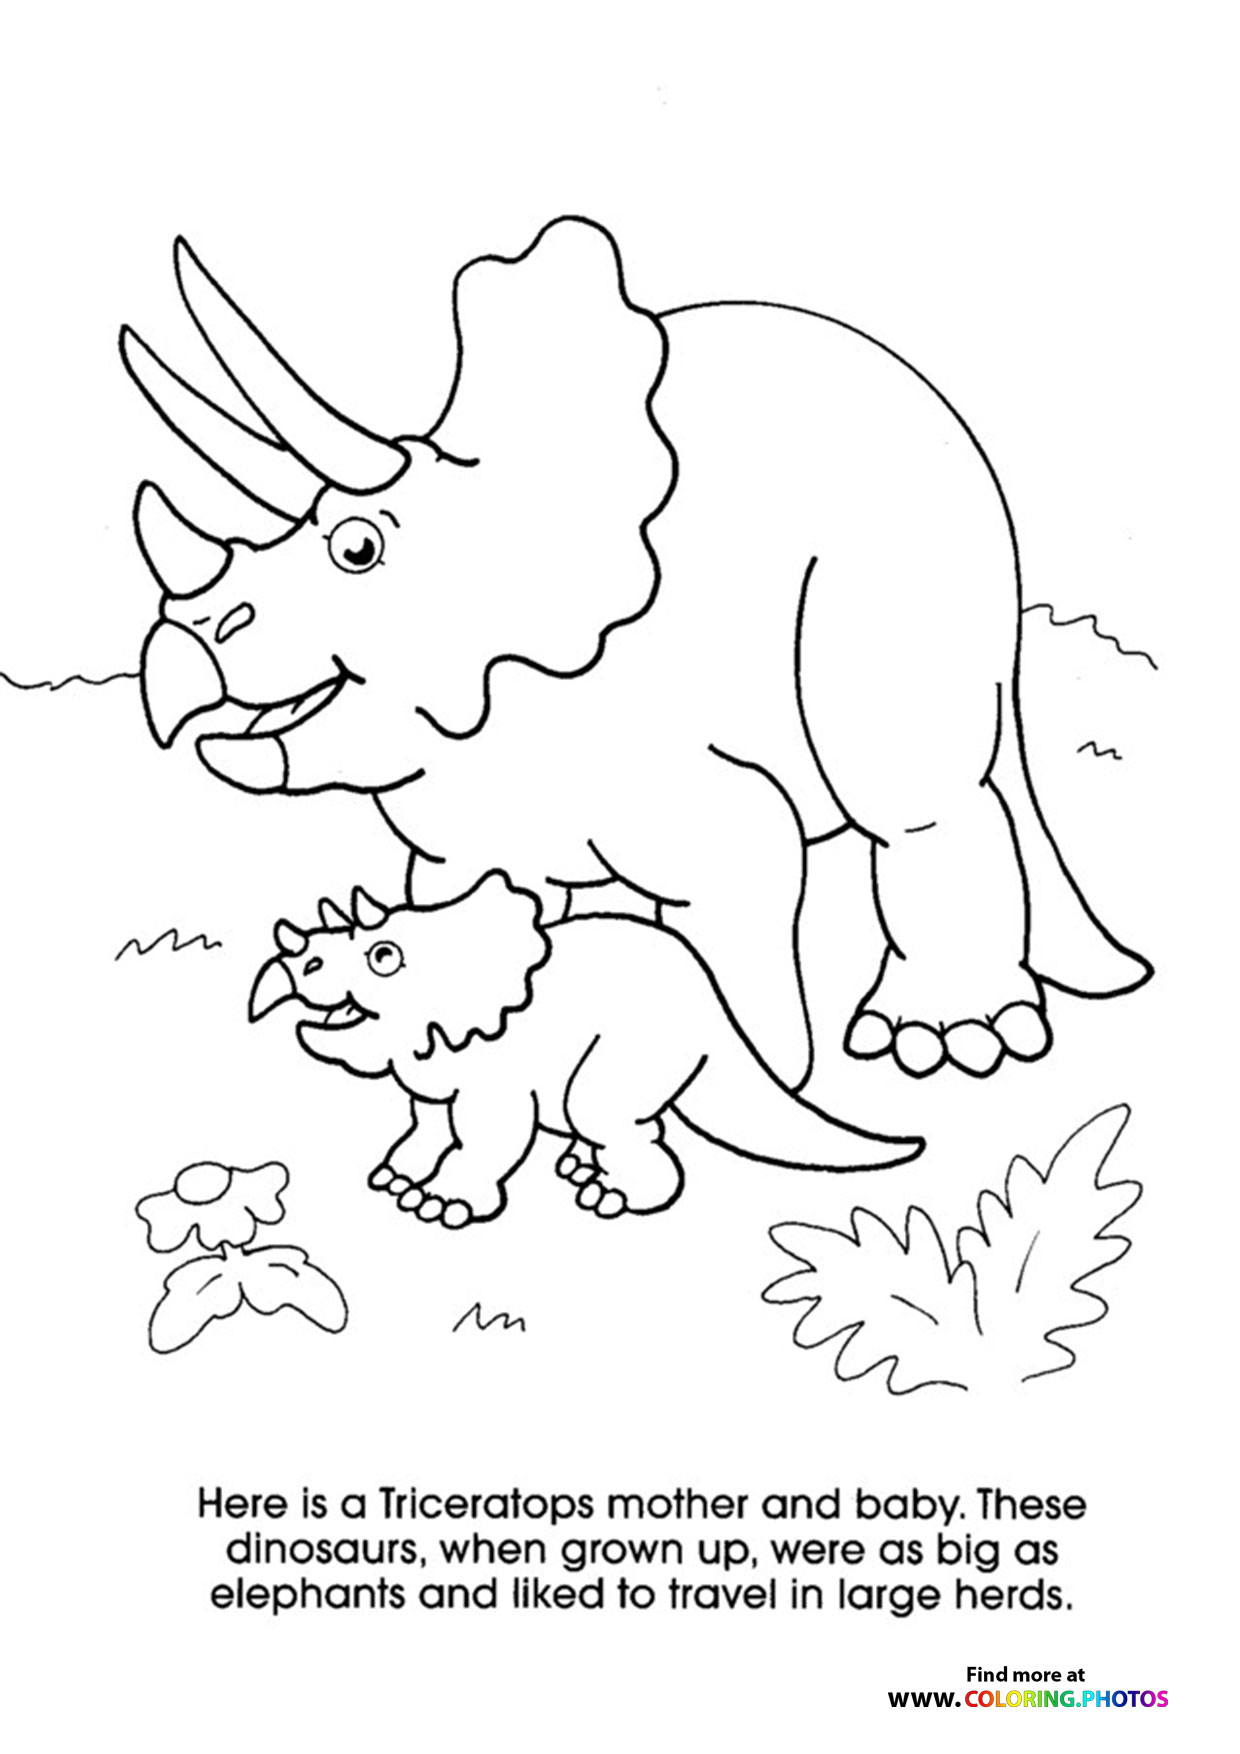 Triceratops mom and baby - Coloring Pages for kids